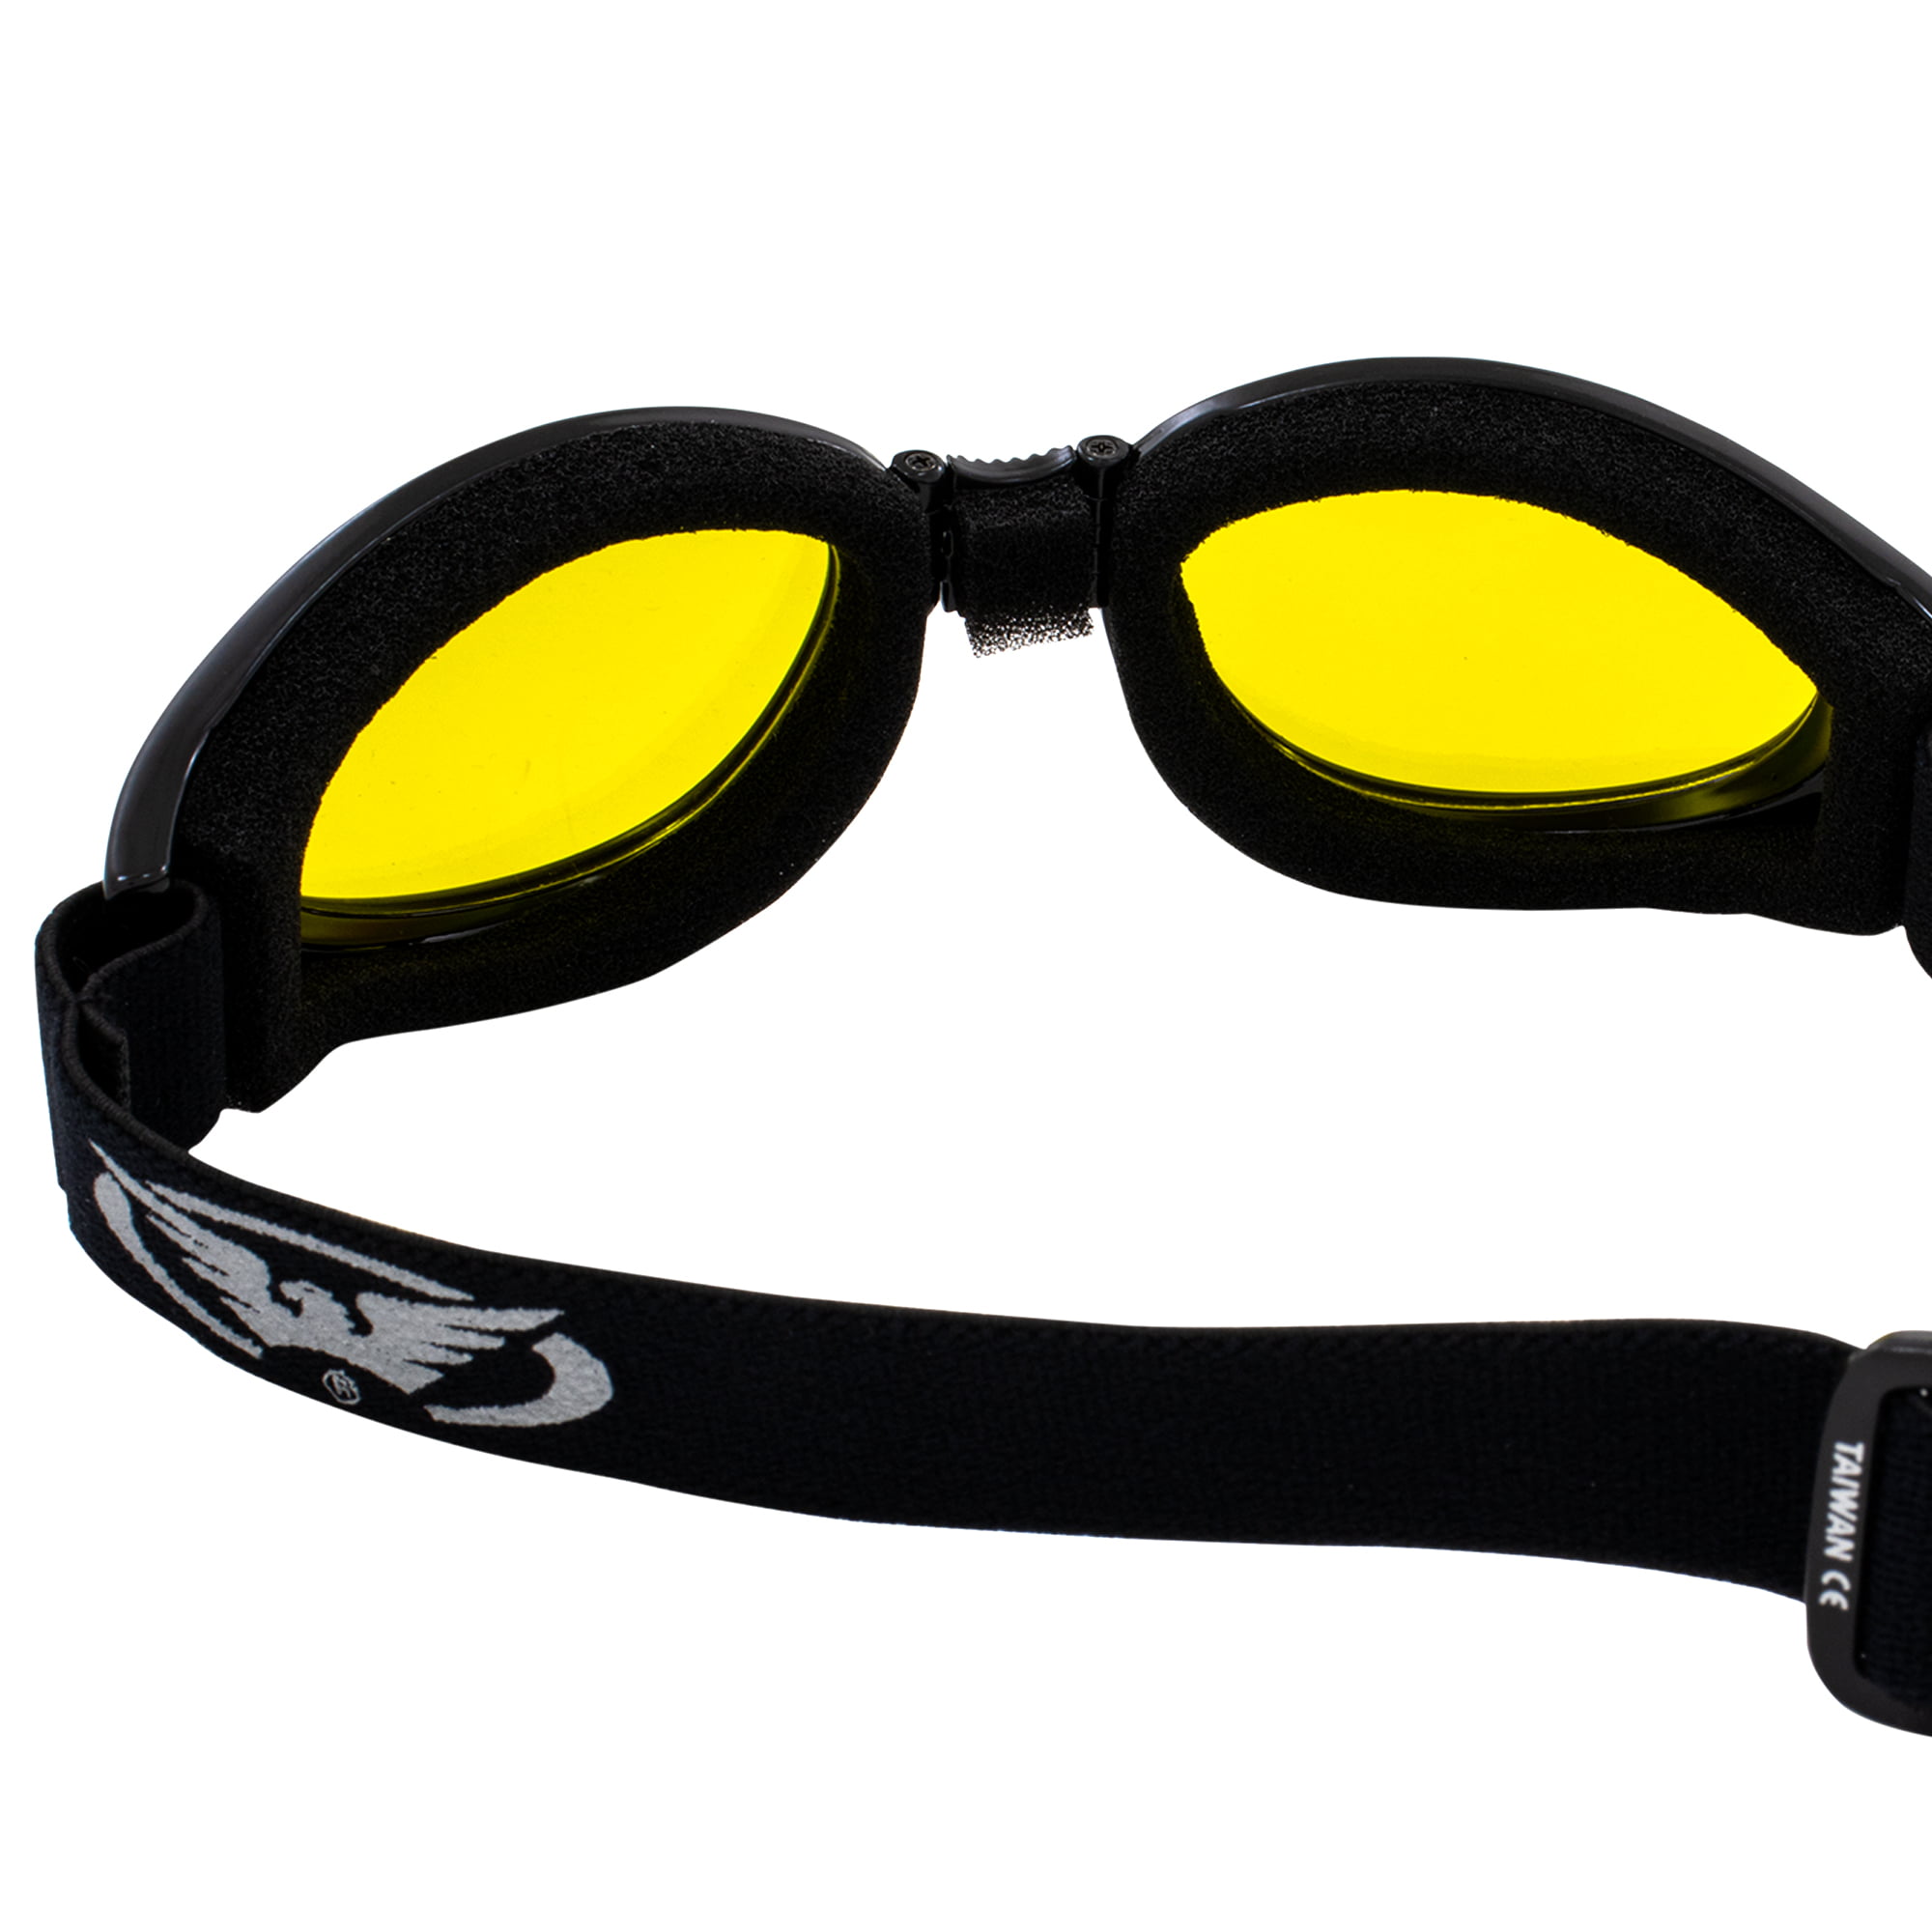 Global Vision Adventure Folding Motorcycle BLACK Goggles with YELLOW MIRROR Lens